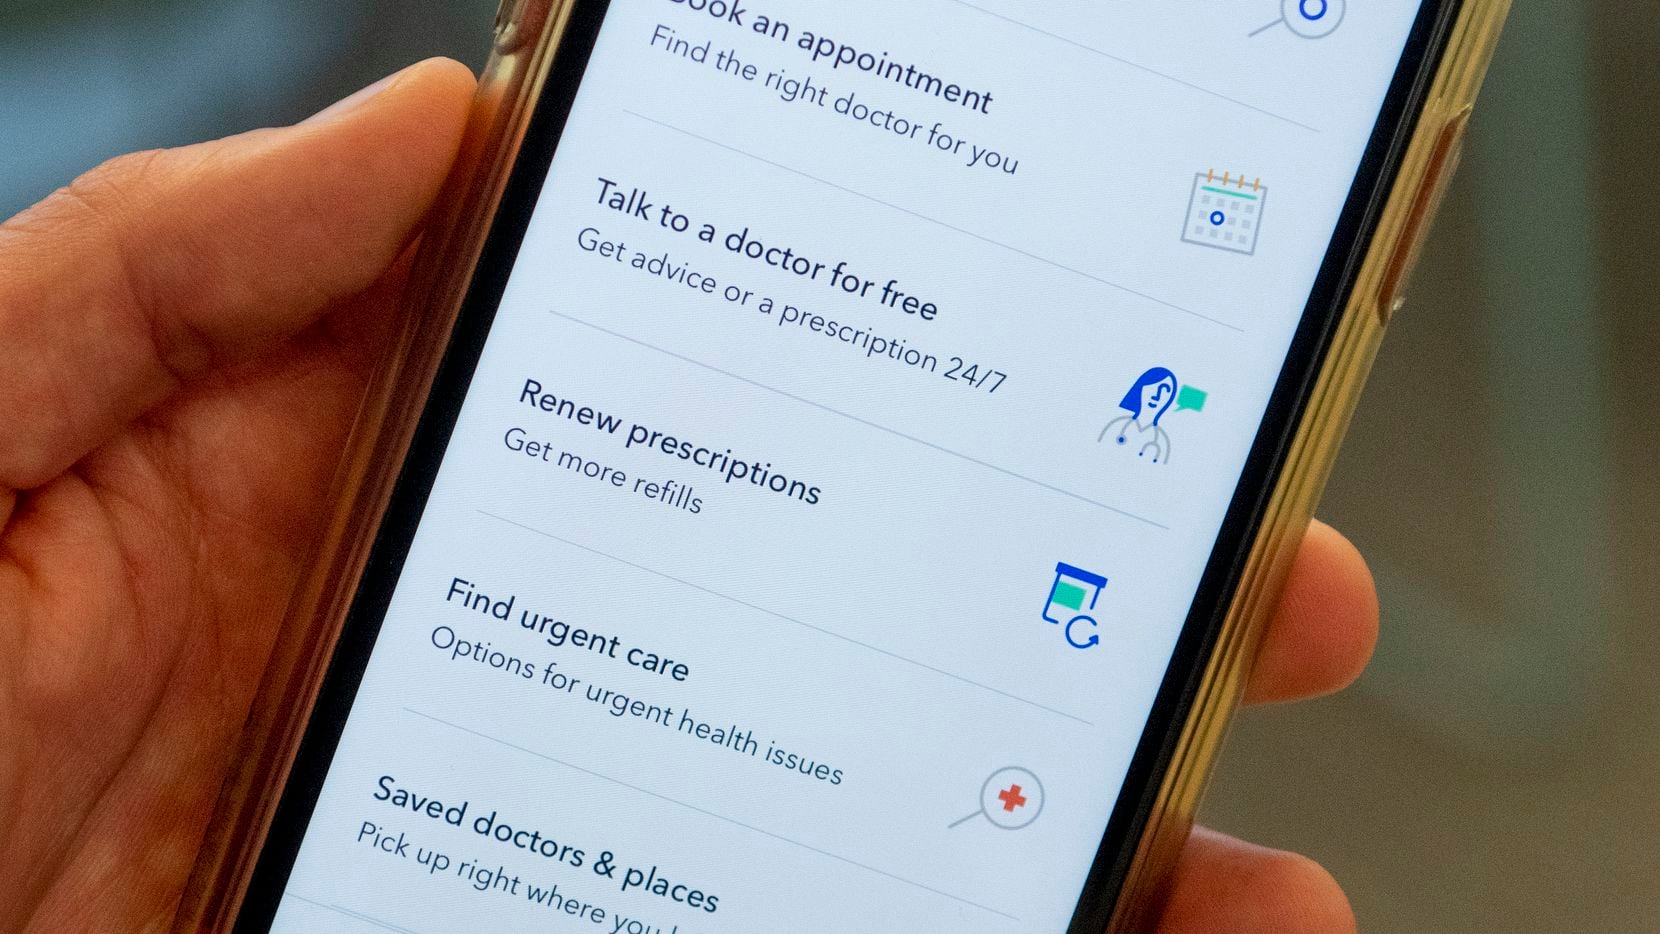 Oscar Health says its app helps improve its customer service — one of the biggest consumer...